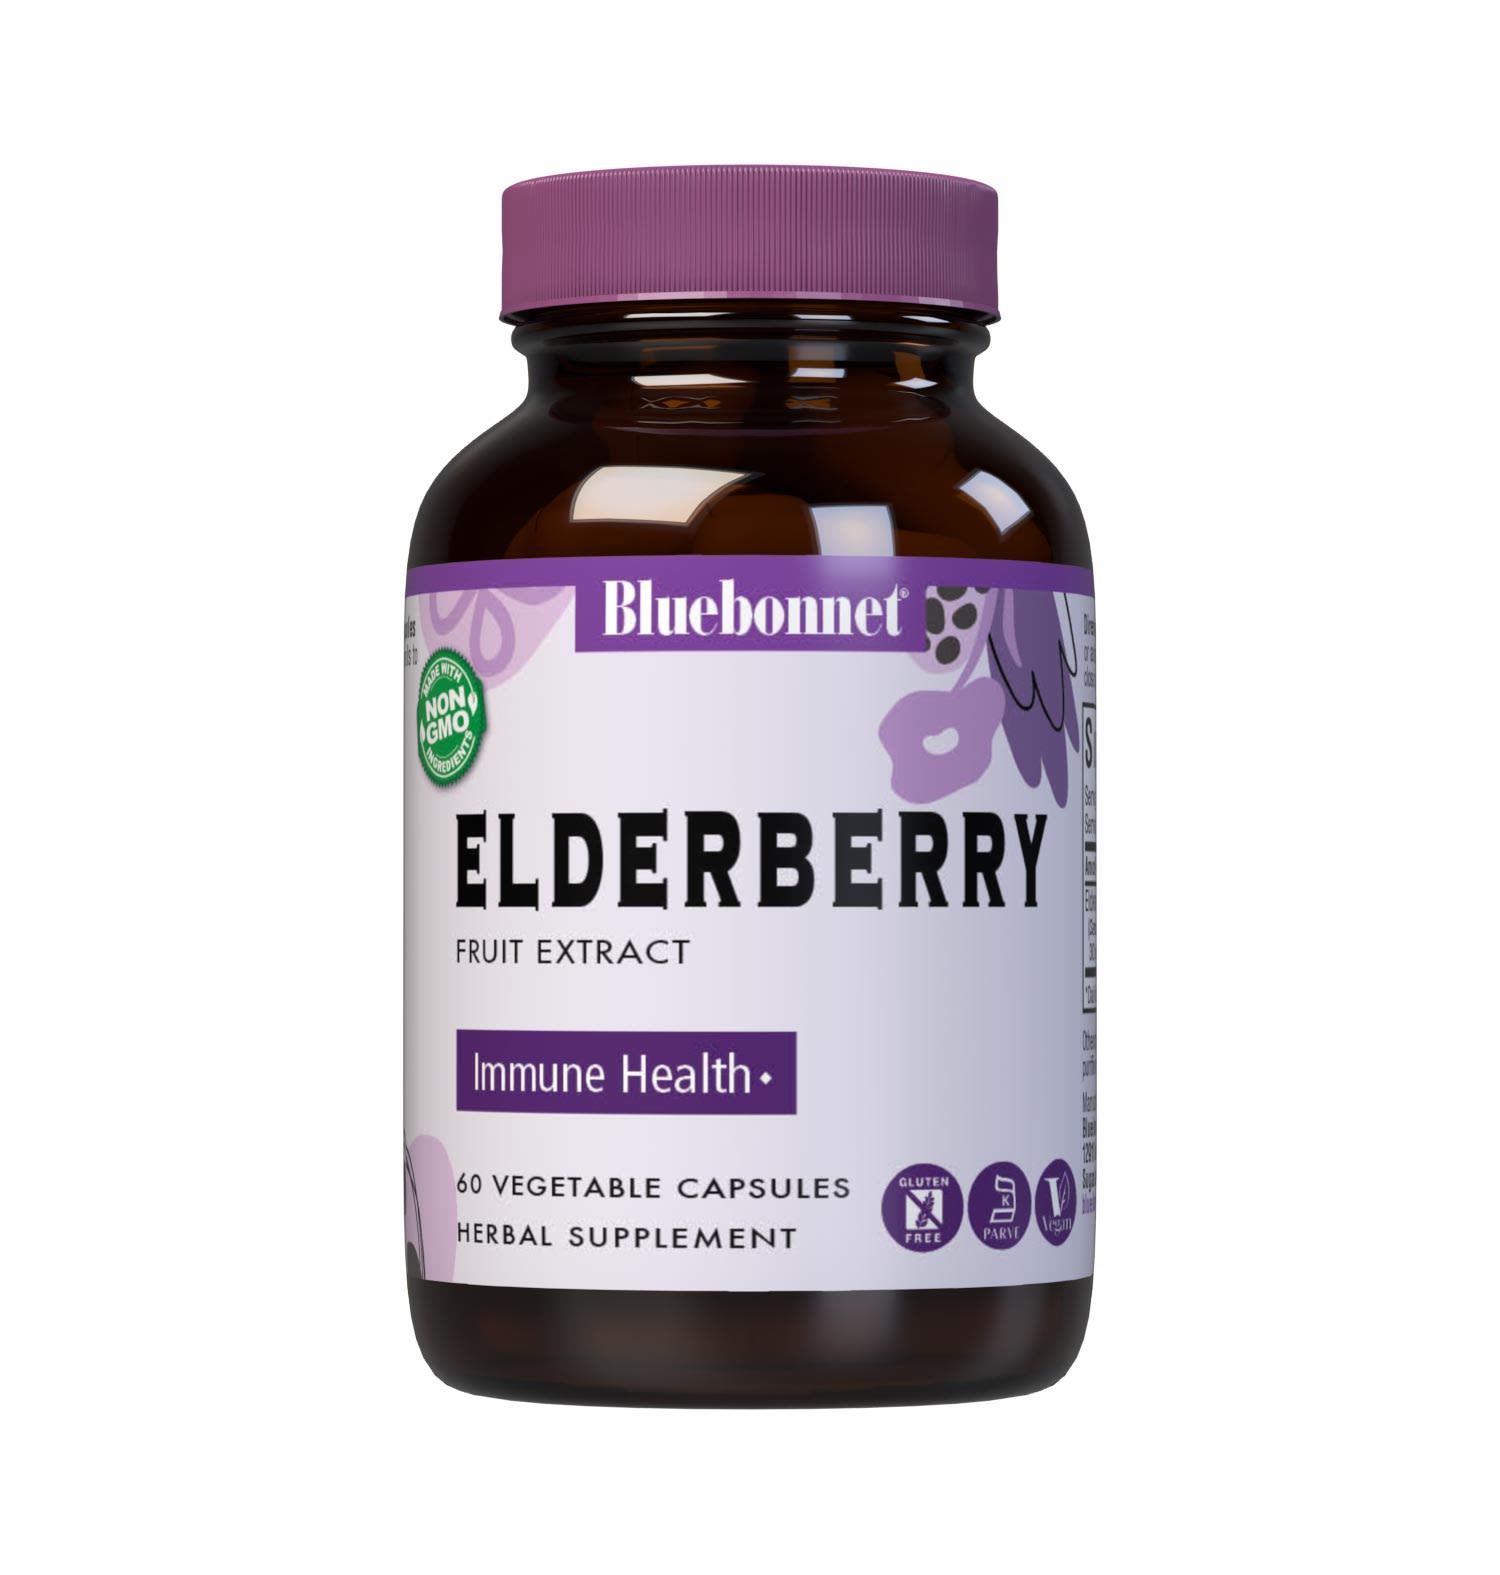 Bluebonnet’s Elderberry Fruit Extract 60 Vegetable Capsules contain a standardized extract of polyphenols, the most researched active constituents found in elderberry, which may help support immune health. A clean and gentle water-based extraction method is employed to capture and preserve elderberry’s most valuable components. #size_60 count